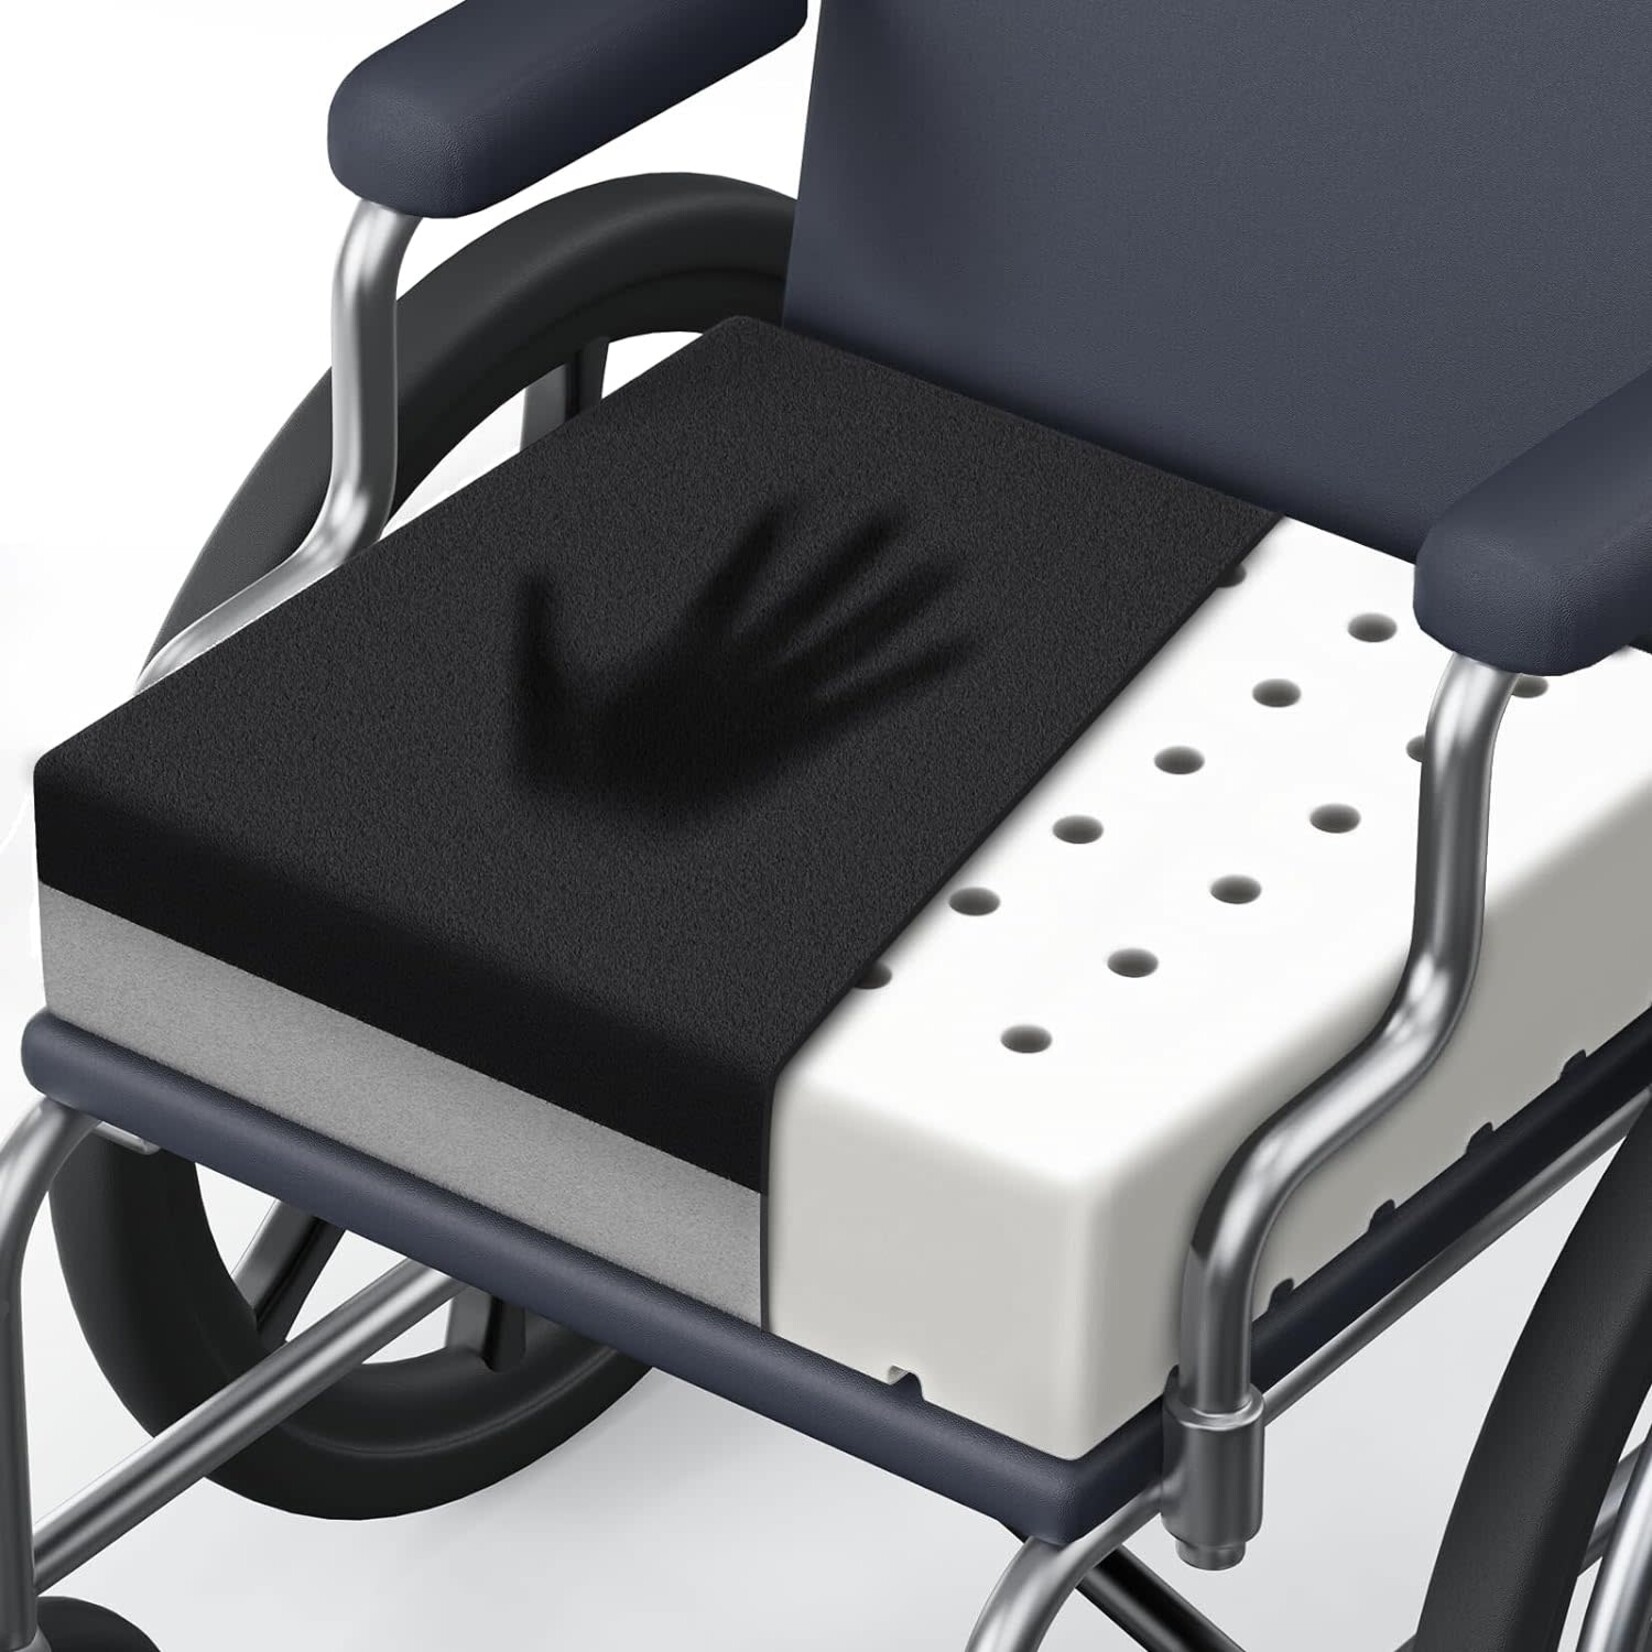 Ventilation Wheelchair Seat Cushions for Tailbone, Pressure Sore & Ulcer Pain Relief, Innovative Breathable Memory Foam for All-day Comfort